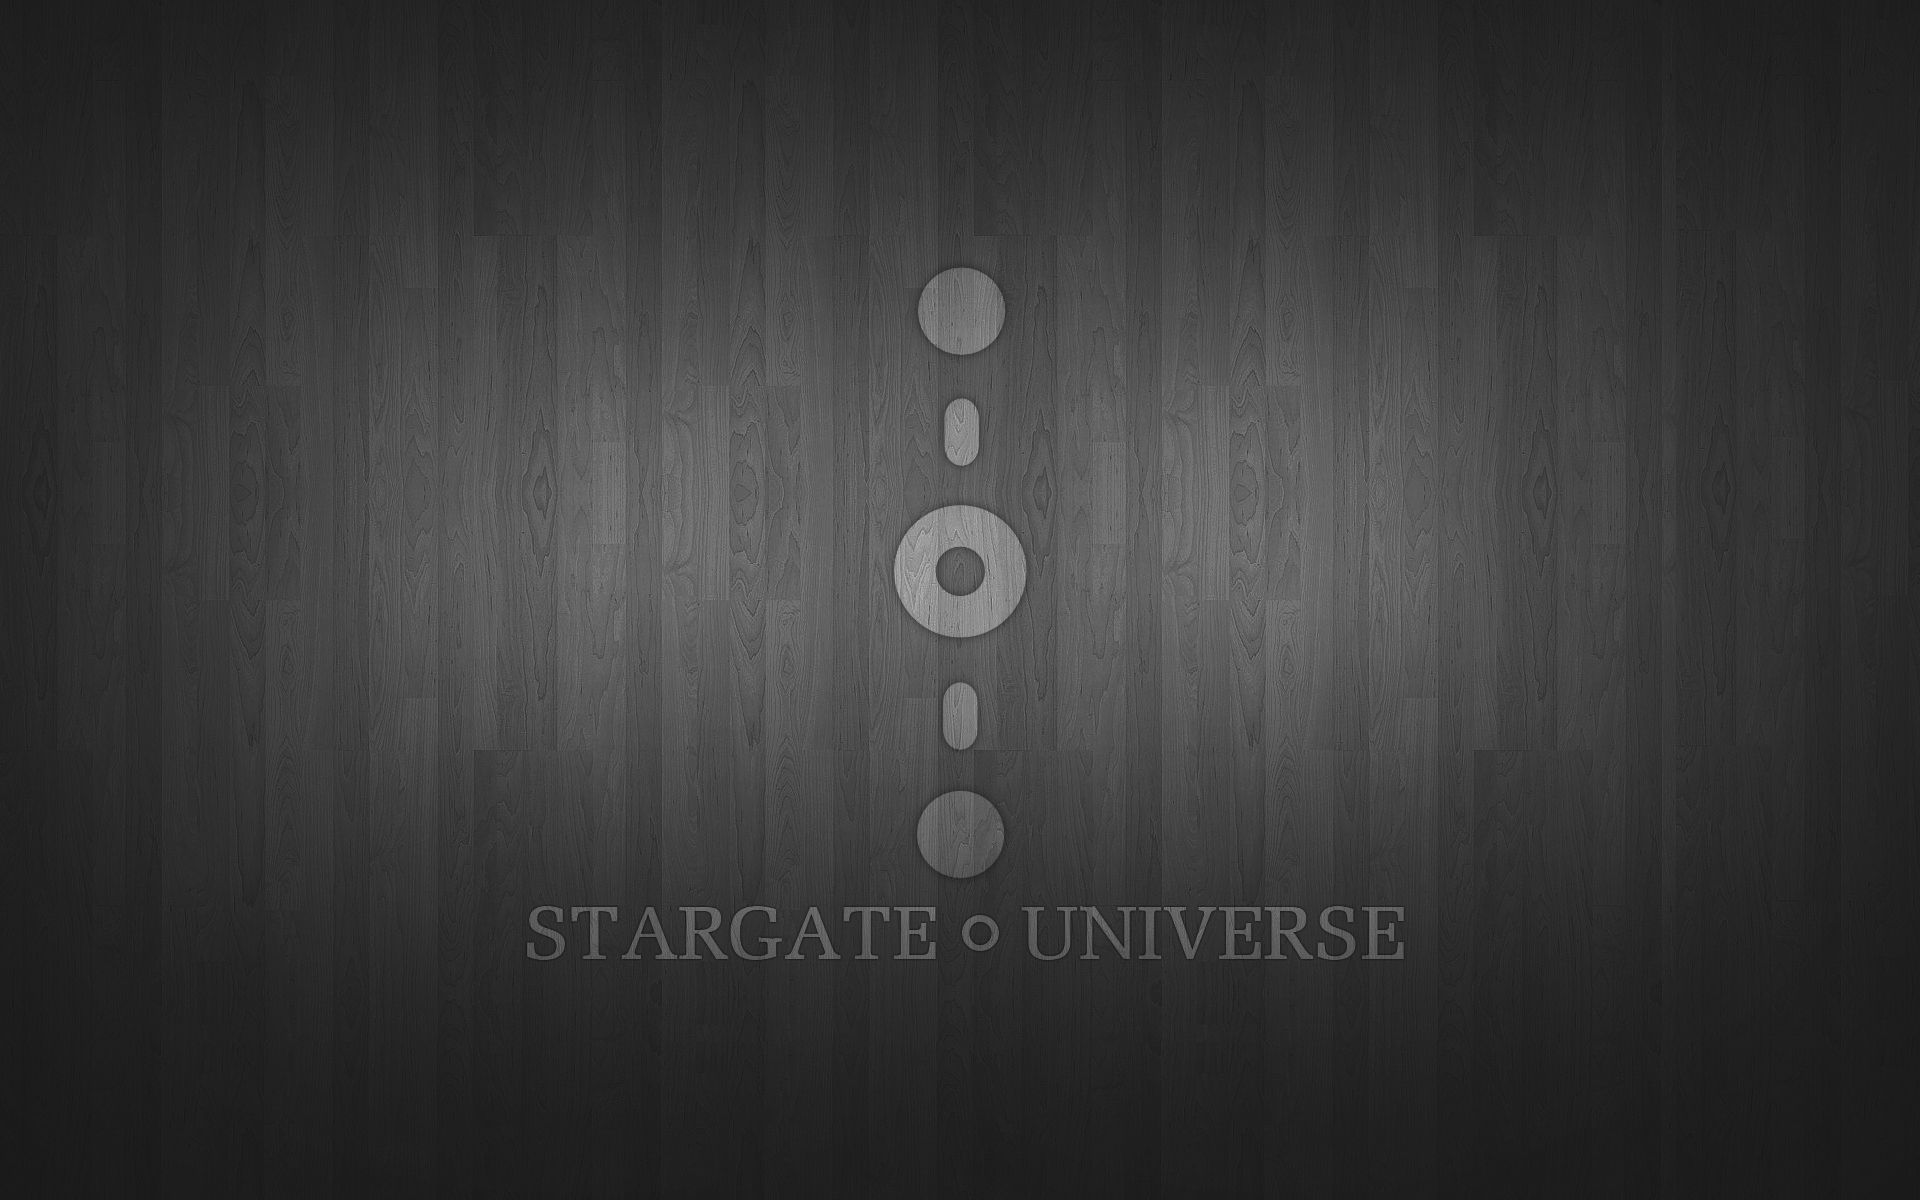 Stargate Universe Wooden Wallpaper by Aether176 on DeviantArt